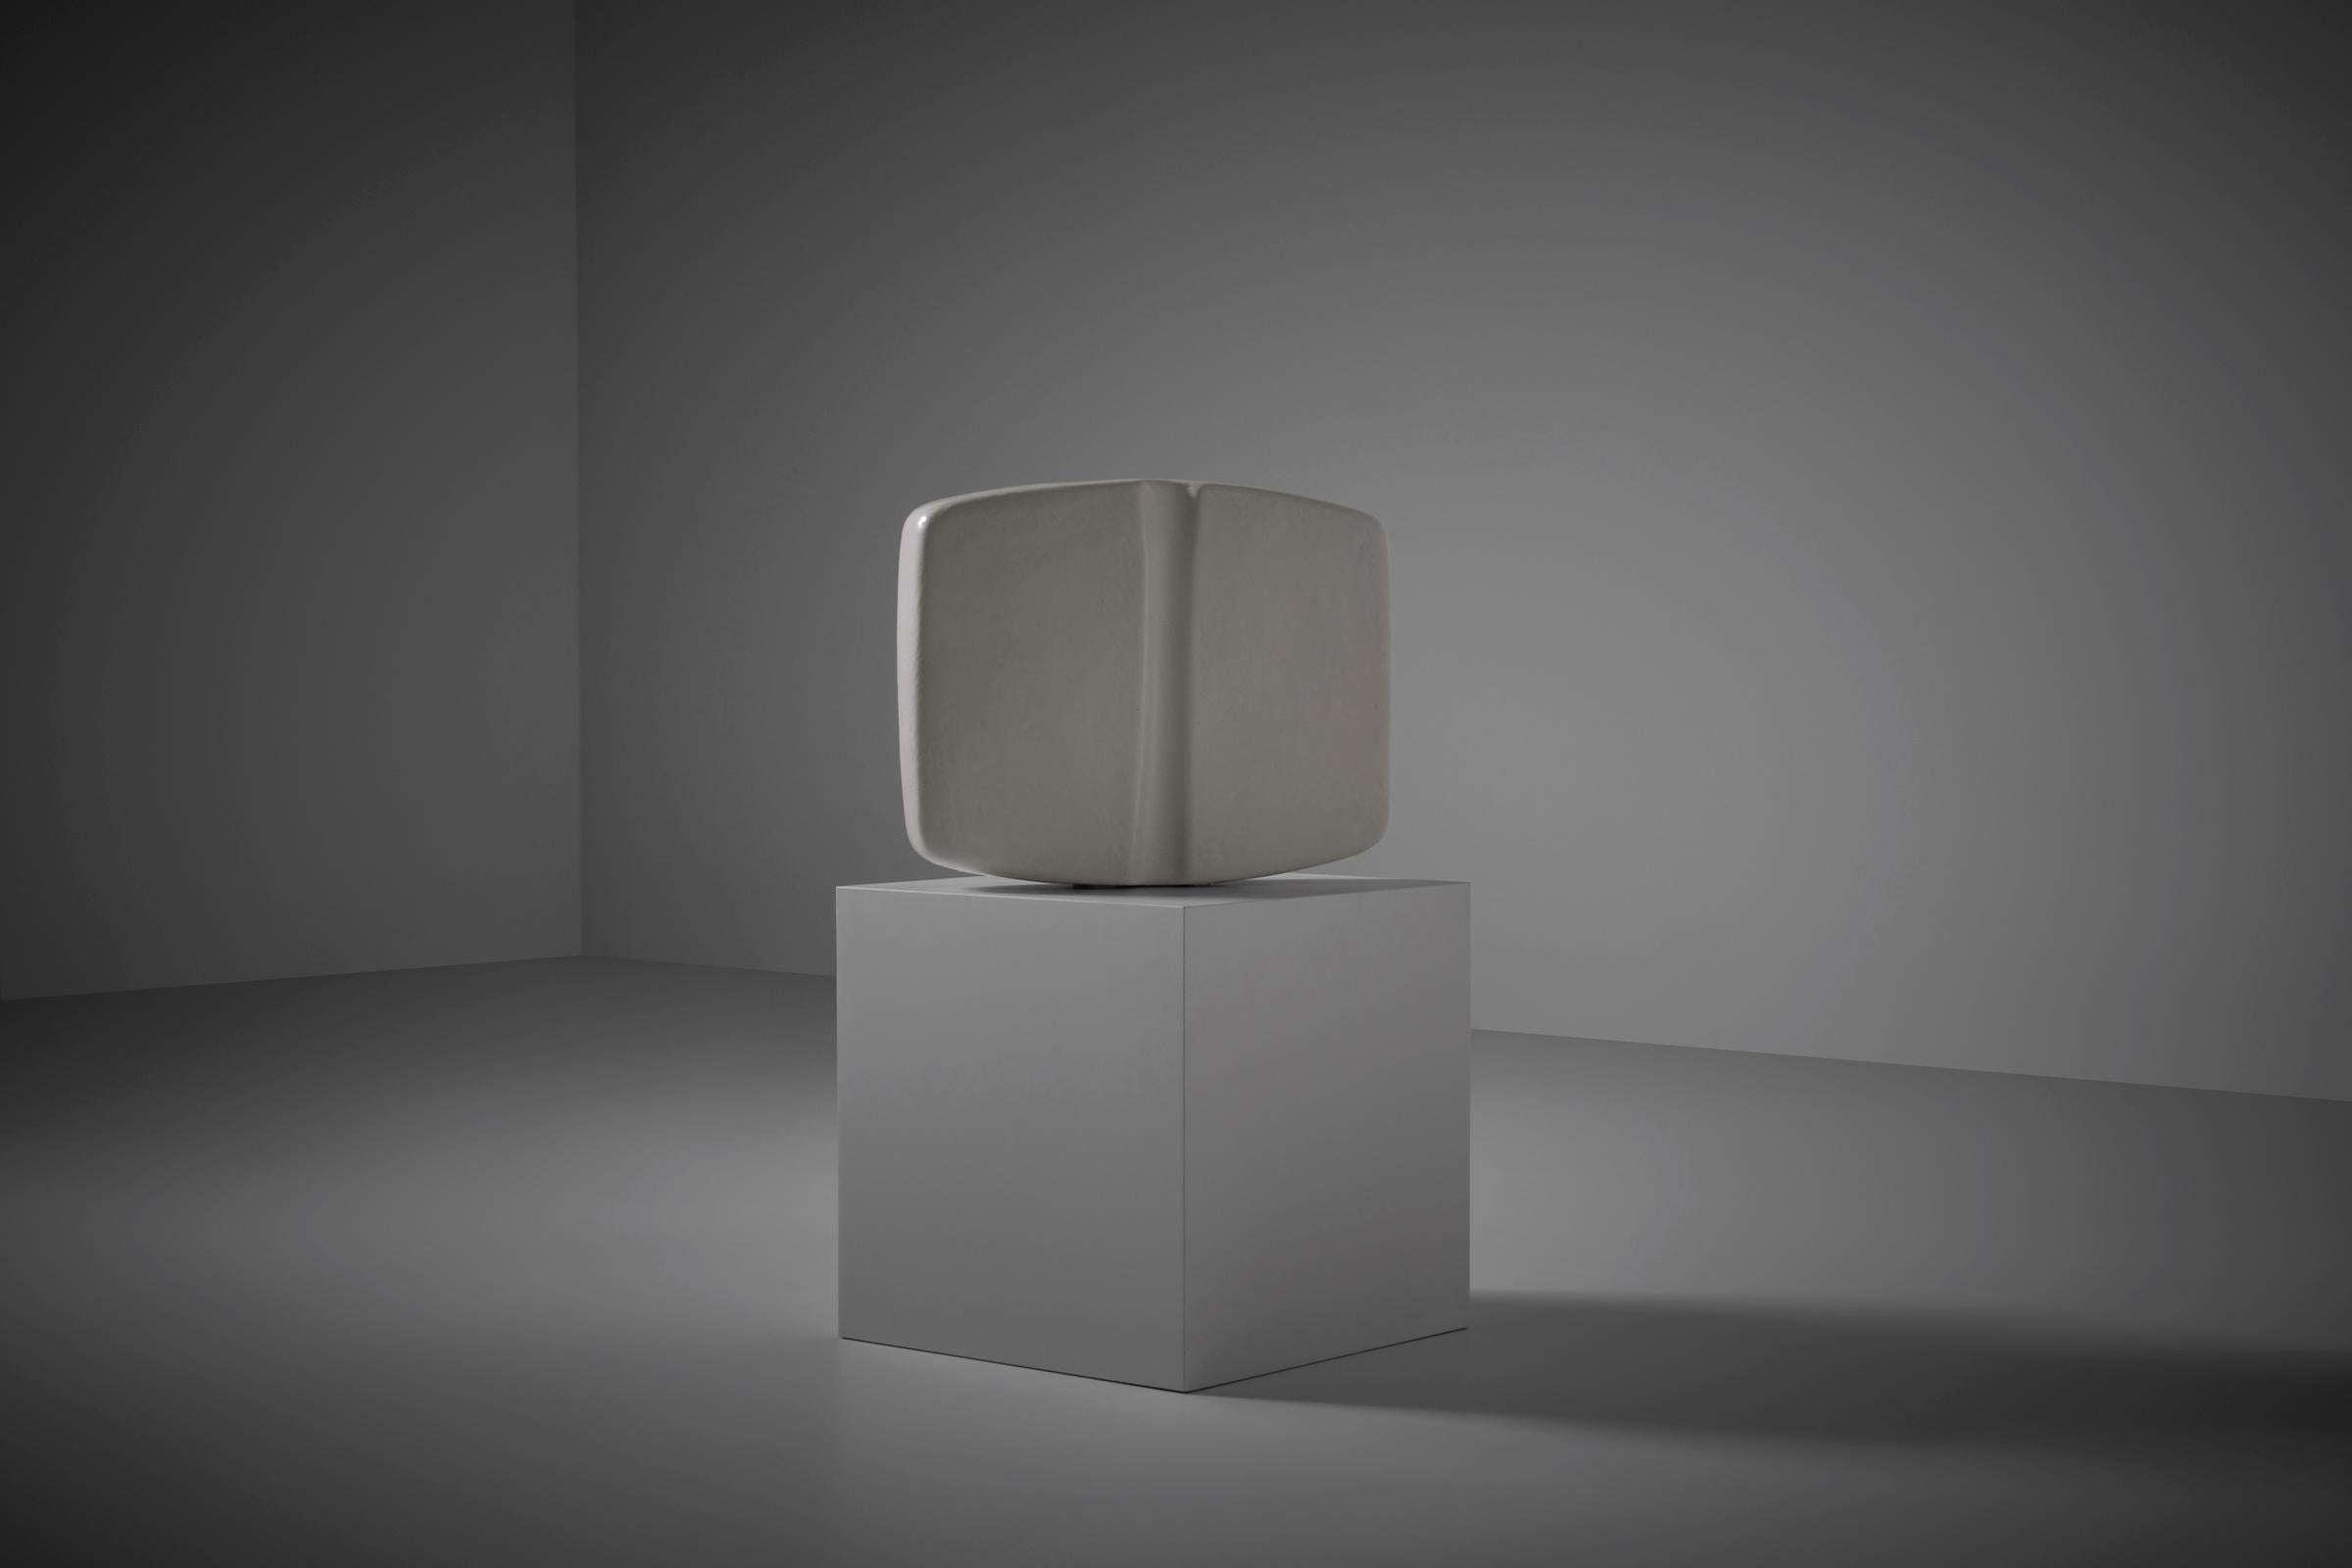 White ceramic sculpture by Pino Castagna (1932 - 2017), Italy 1970s. The sculpture is made from a strong red clay and is finished with a thick voluminous off white, semi gloss glazing which is showing an impeccable crackle structure. The shapes and